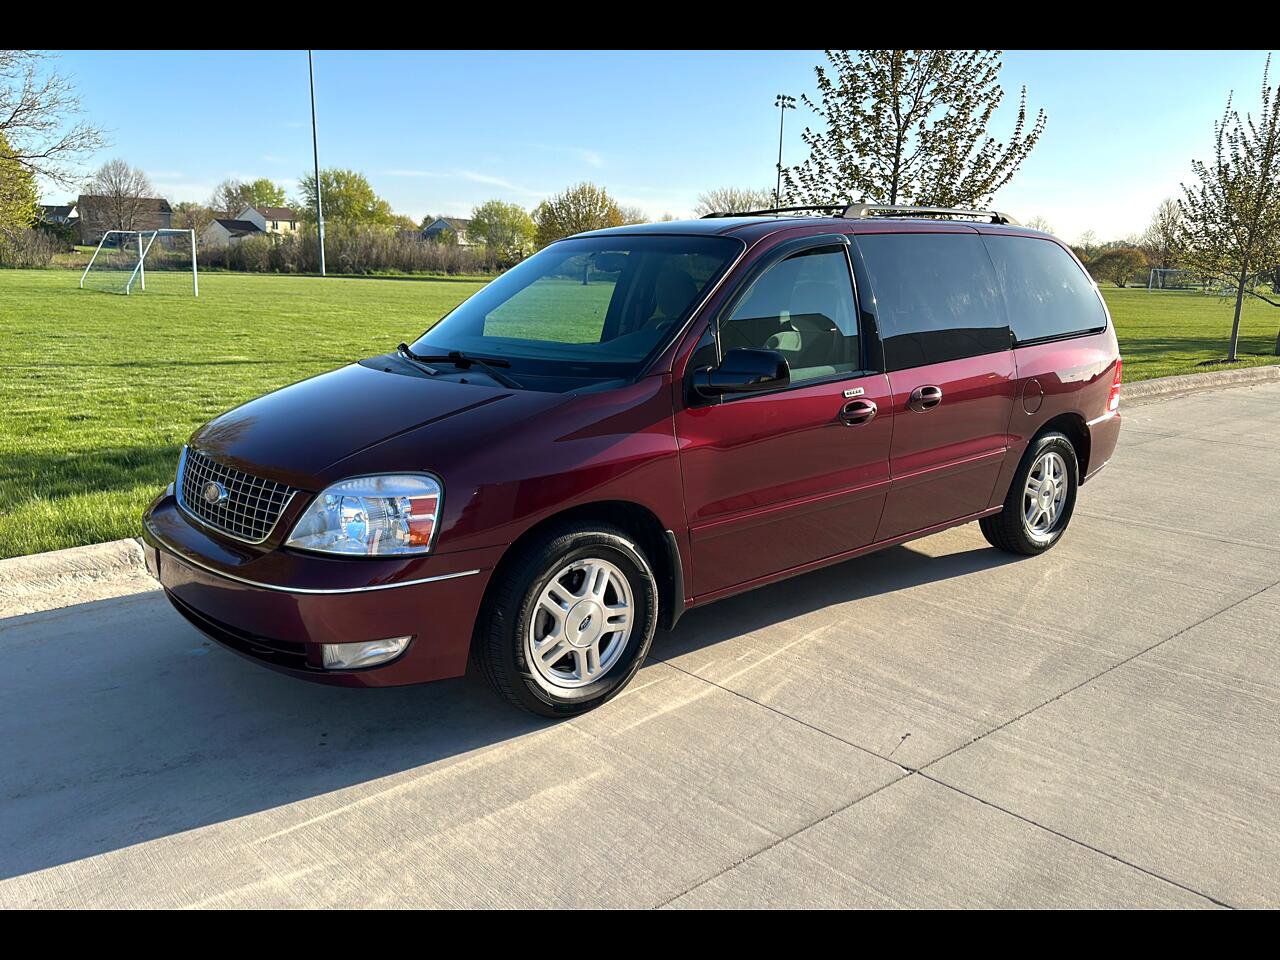 Used Ford Freestar for Sale Right Now - Autotrader